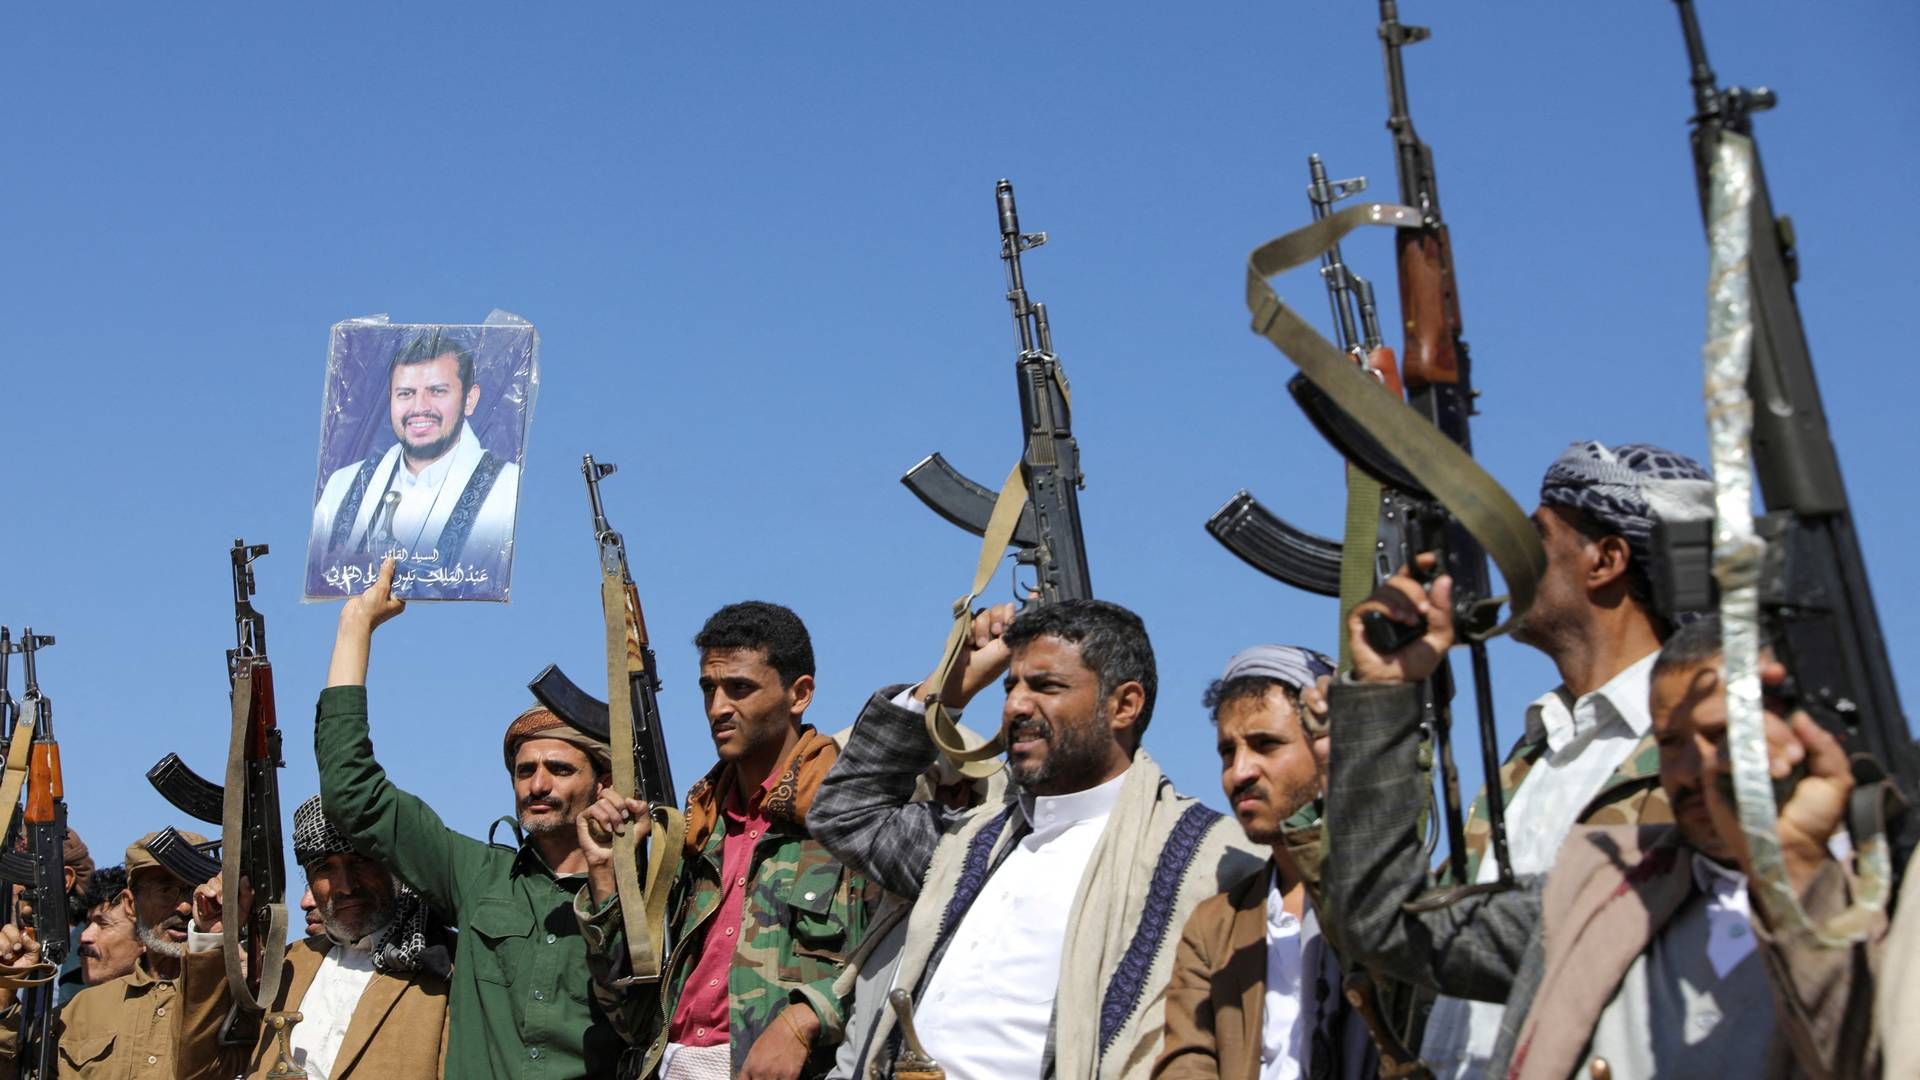 The Yemeni Houthi movement has been threatening shipping with military attacks for months, and now piracy is adding to the industry's challenges. | Photo: Khaled Abdullah/Reuters/Ritzau Scanpix